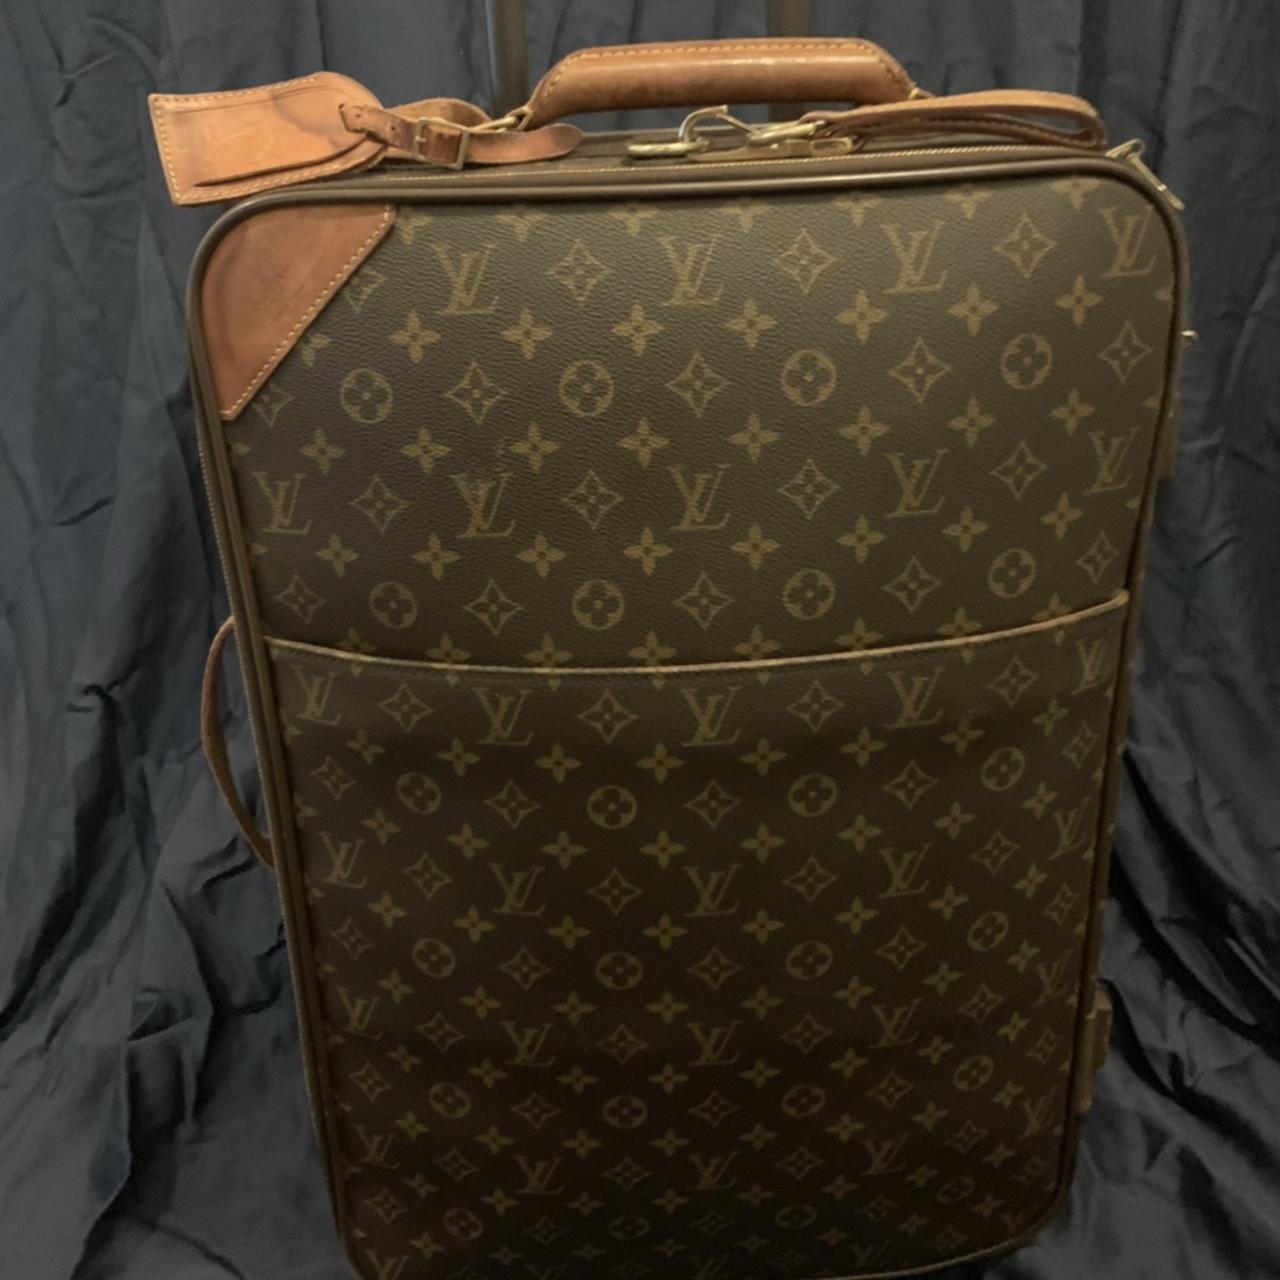 100% Authentic Louis Vuitton luggage set. Carry on